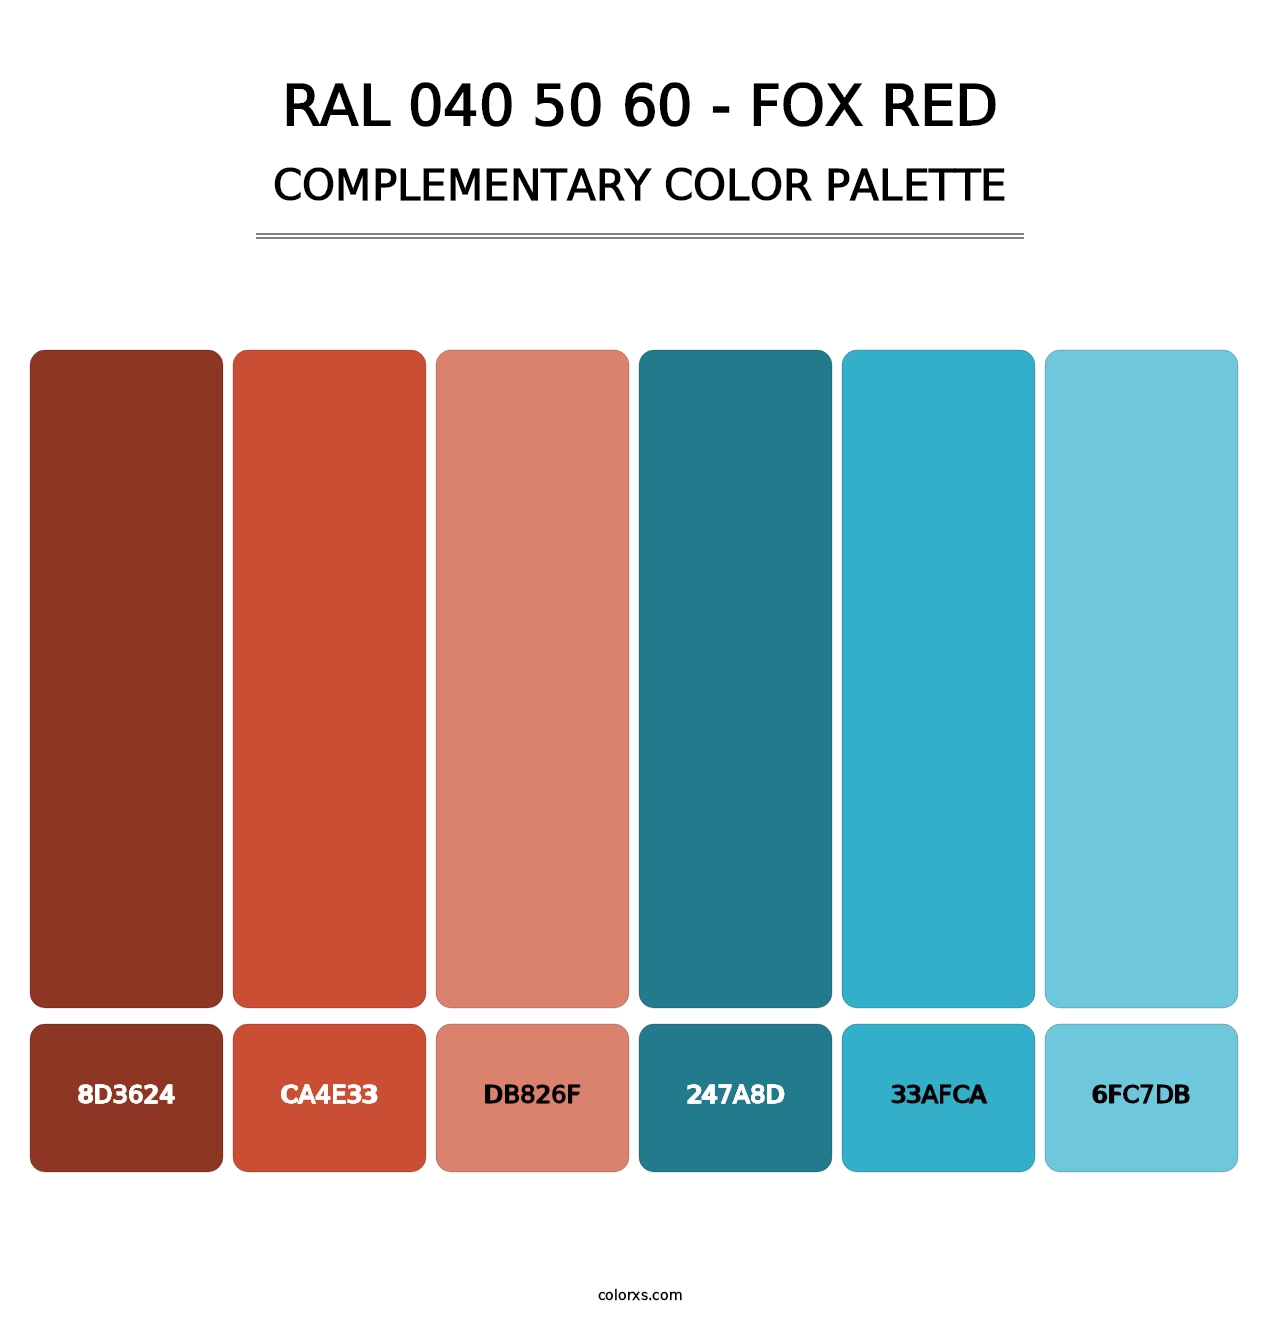 RAL 040 50 60 - Fox Red - Complementary Color Palette